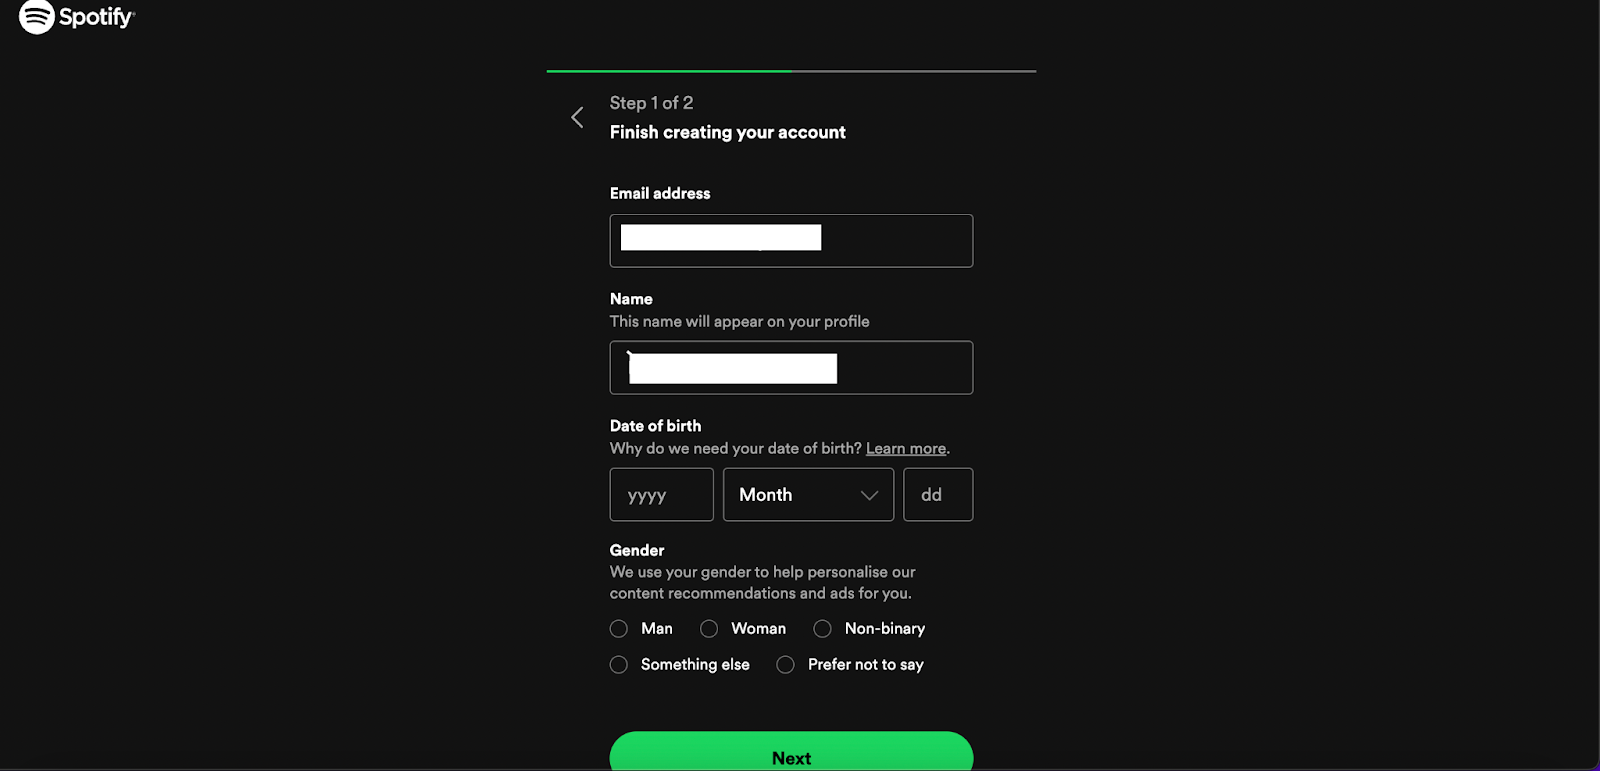 Spotify's simple onboarding process are a great way to collect zero-party data.